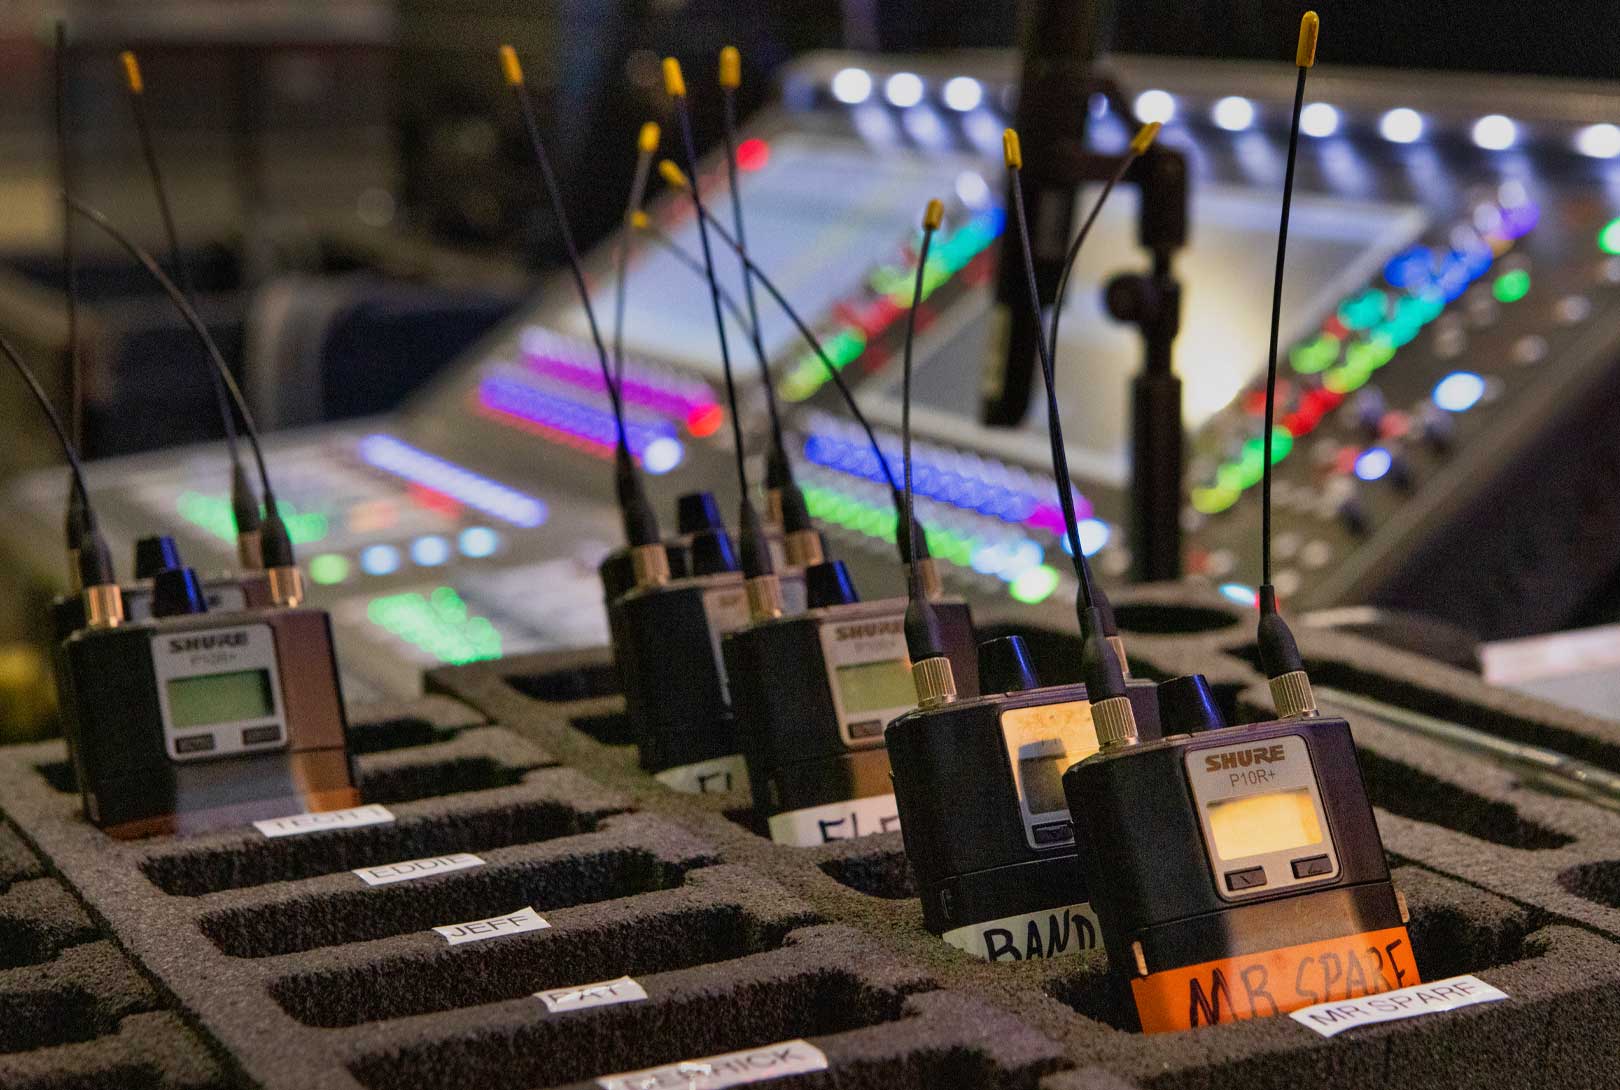 Shure Audio Monitors In A Dock At A Live Concert